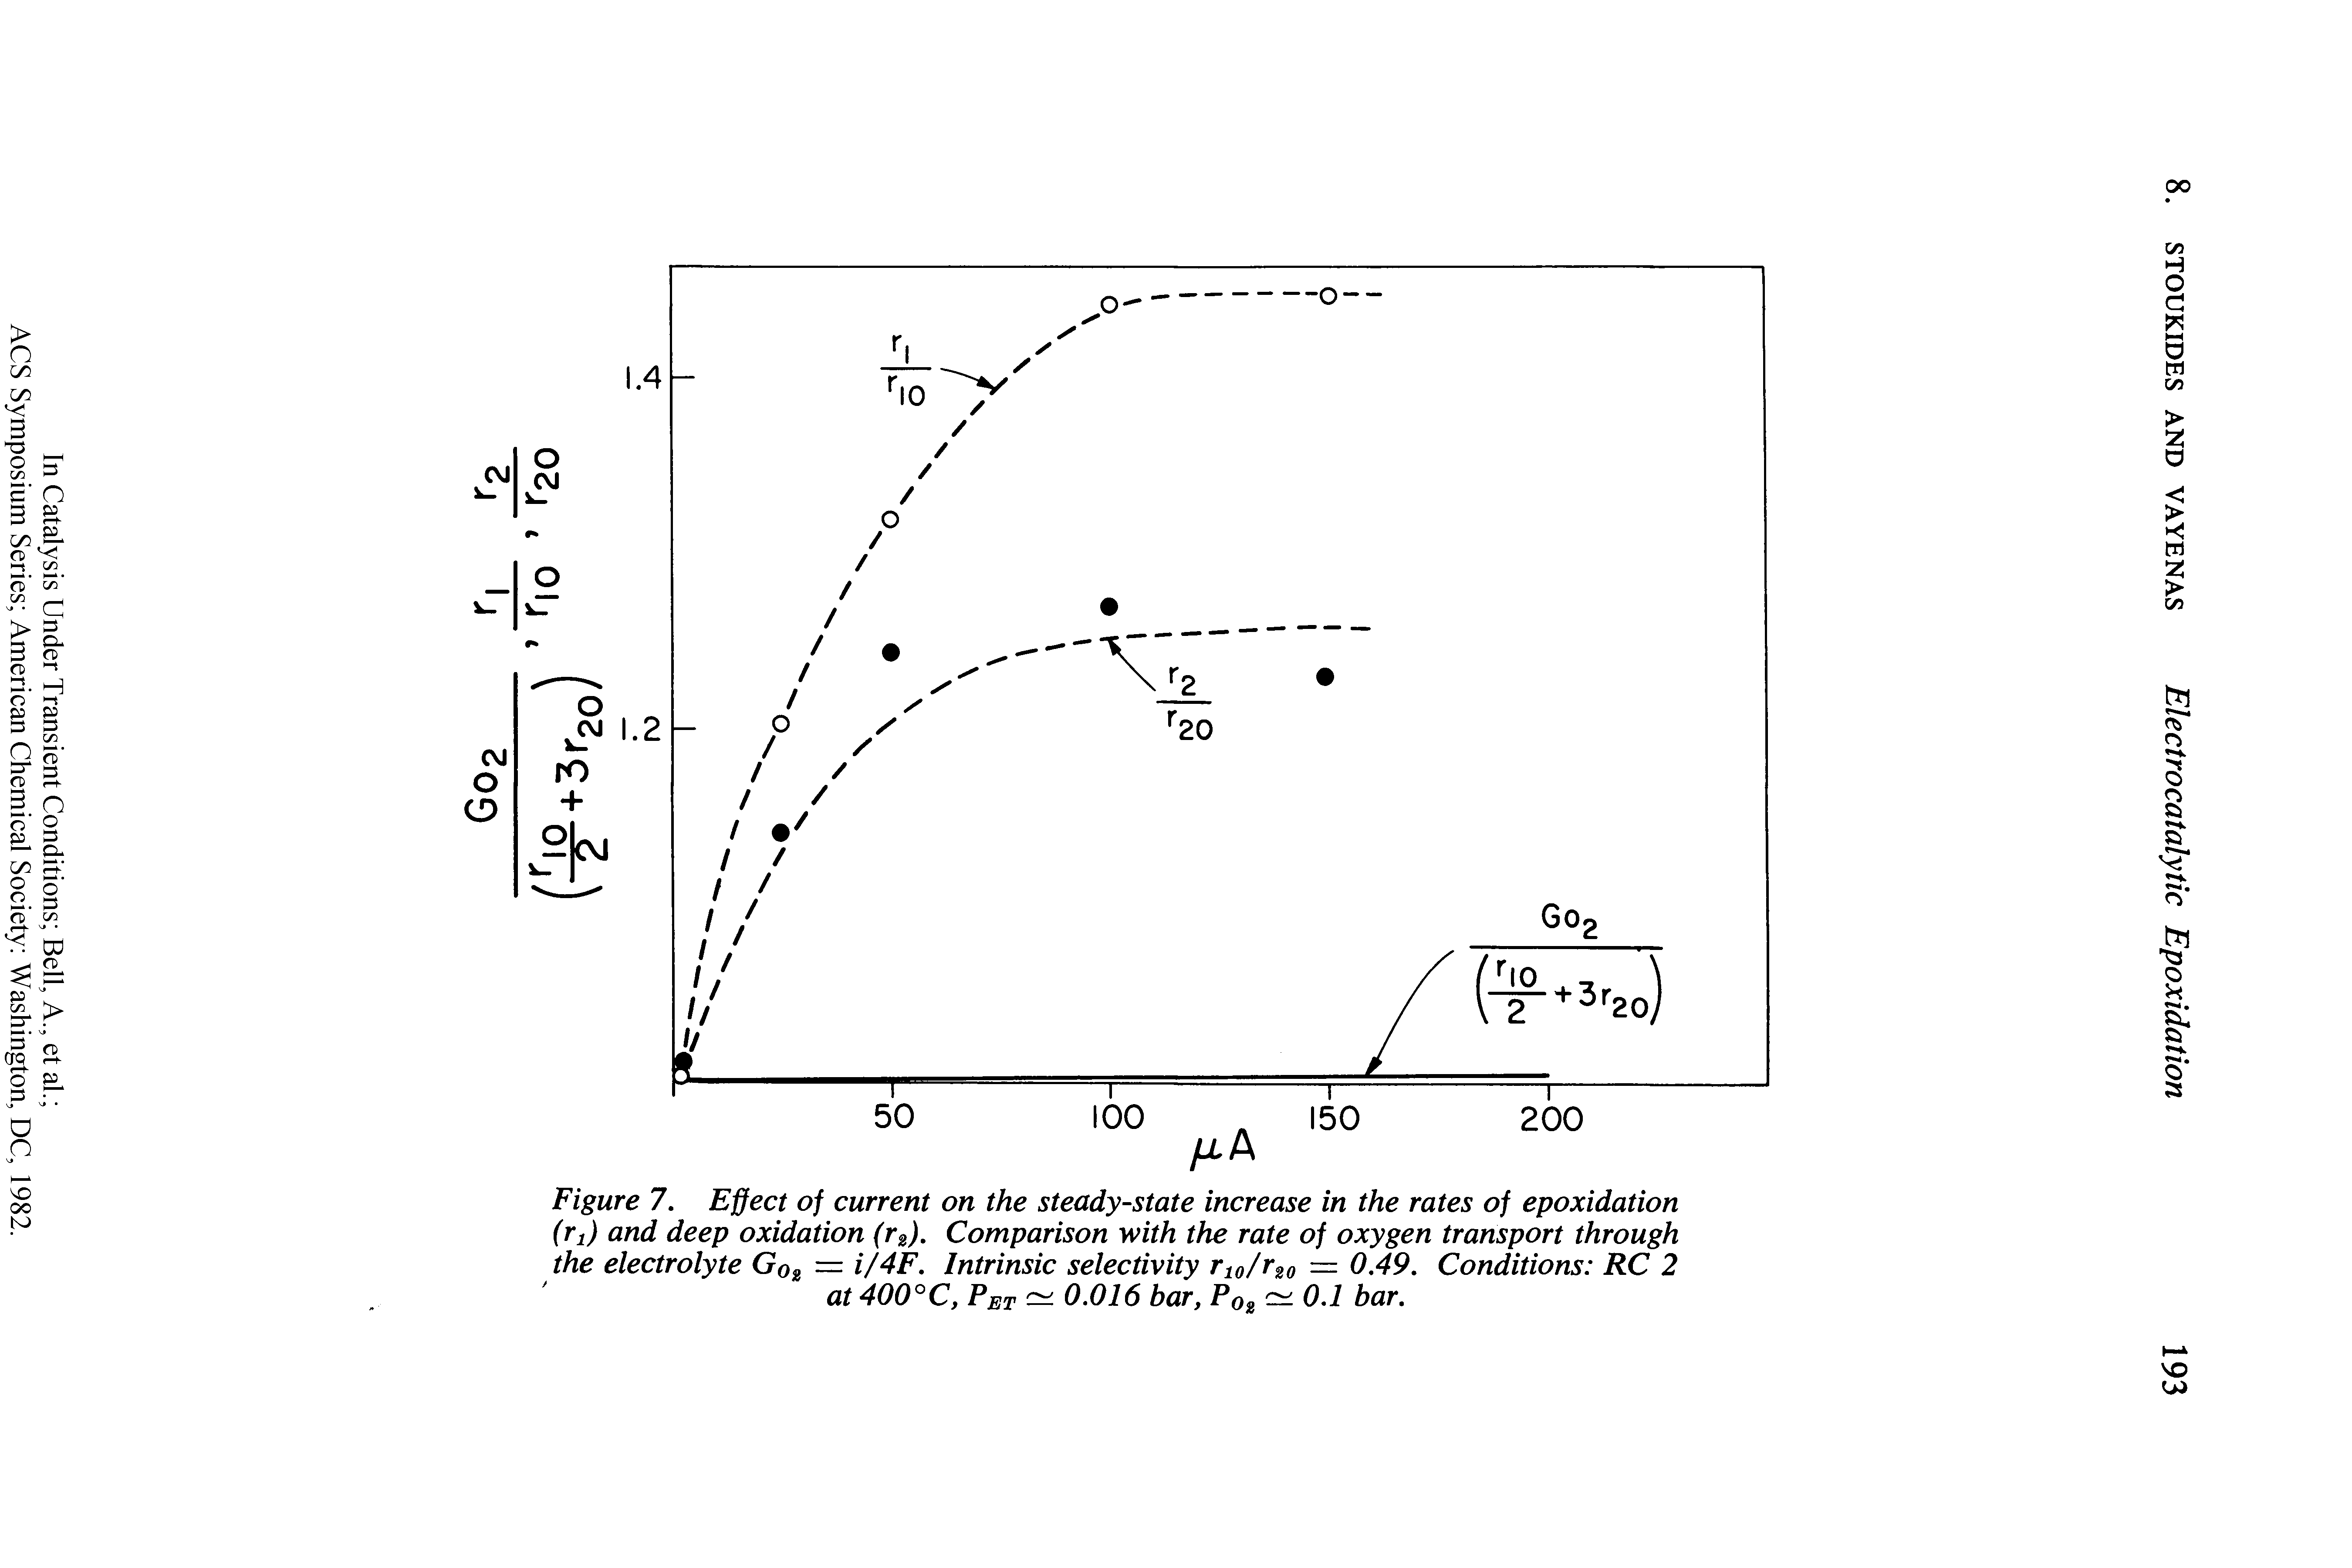 Figure 7. Effect of current on the steady-state increase in the rates of epoxidation (rt) and deep oxidation (r2). Comparison with the rate of oxygen transport through the electrolyte G0z — i/4F. Intrinsic selectivity r10/r20 = 0.49. Conditions RC 2 at 400°C, Pet — 0.016 bar, P02 — 0.1 bar.